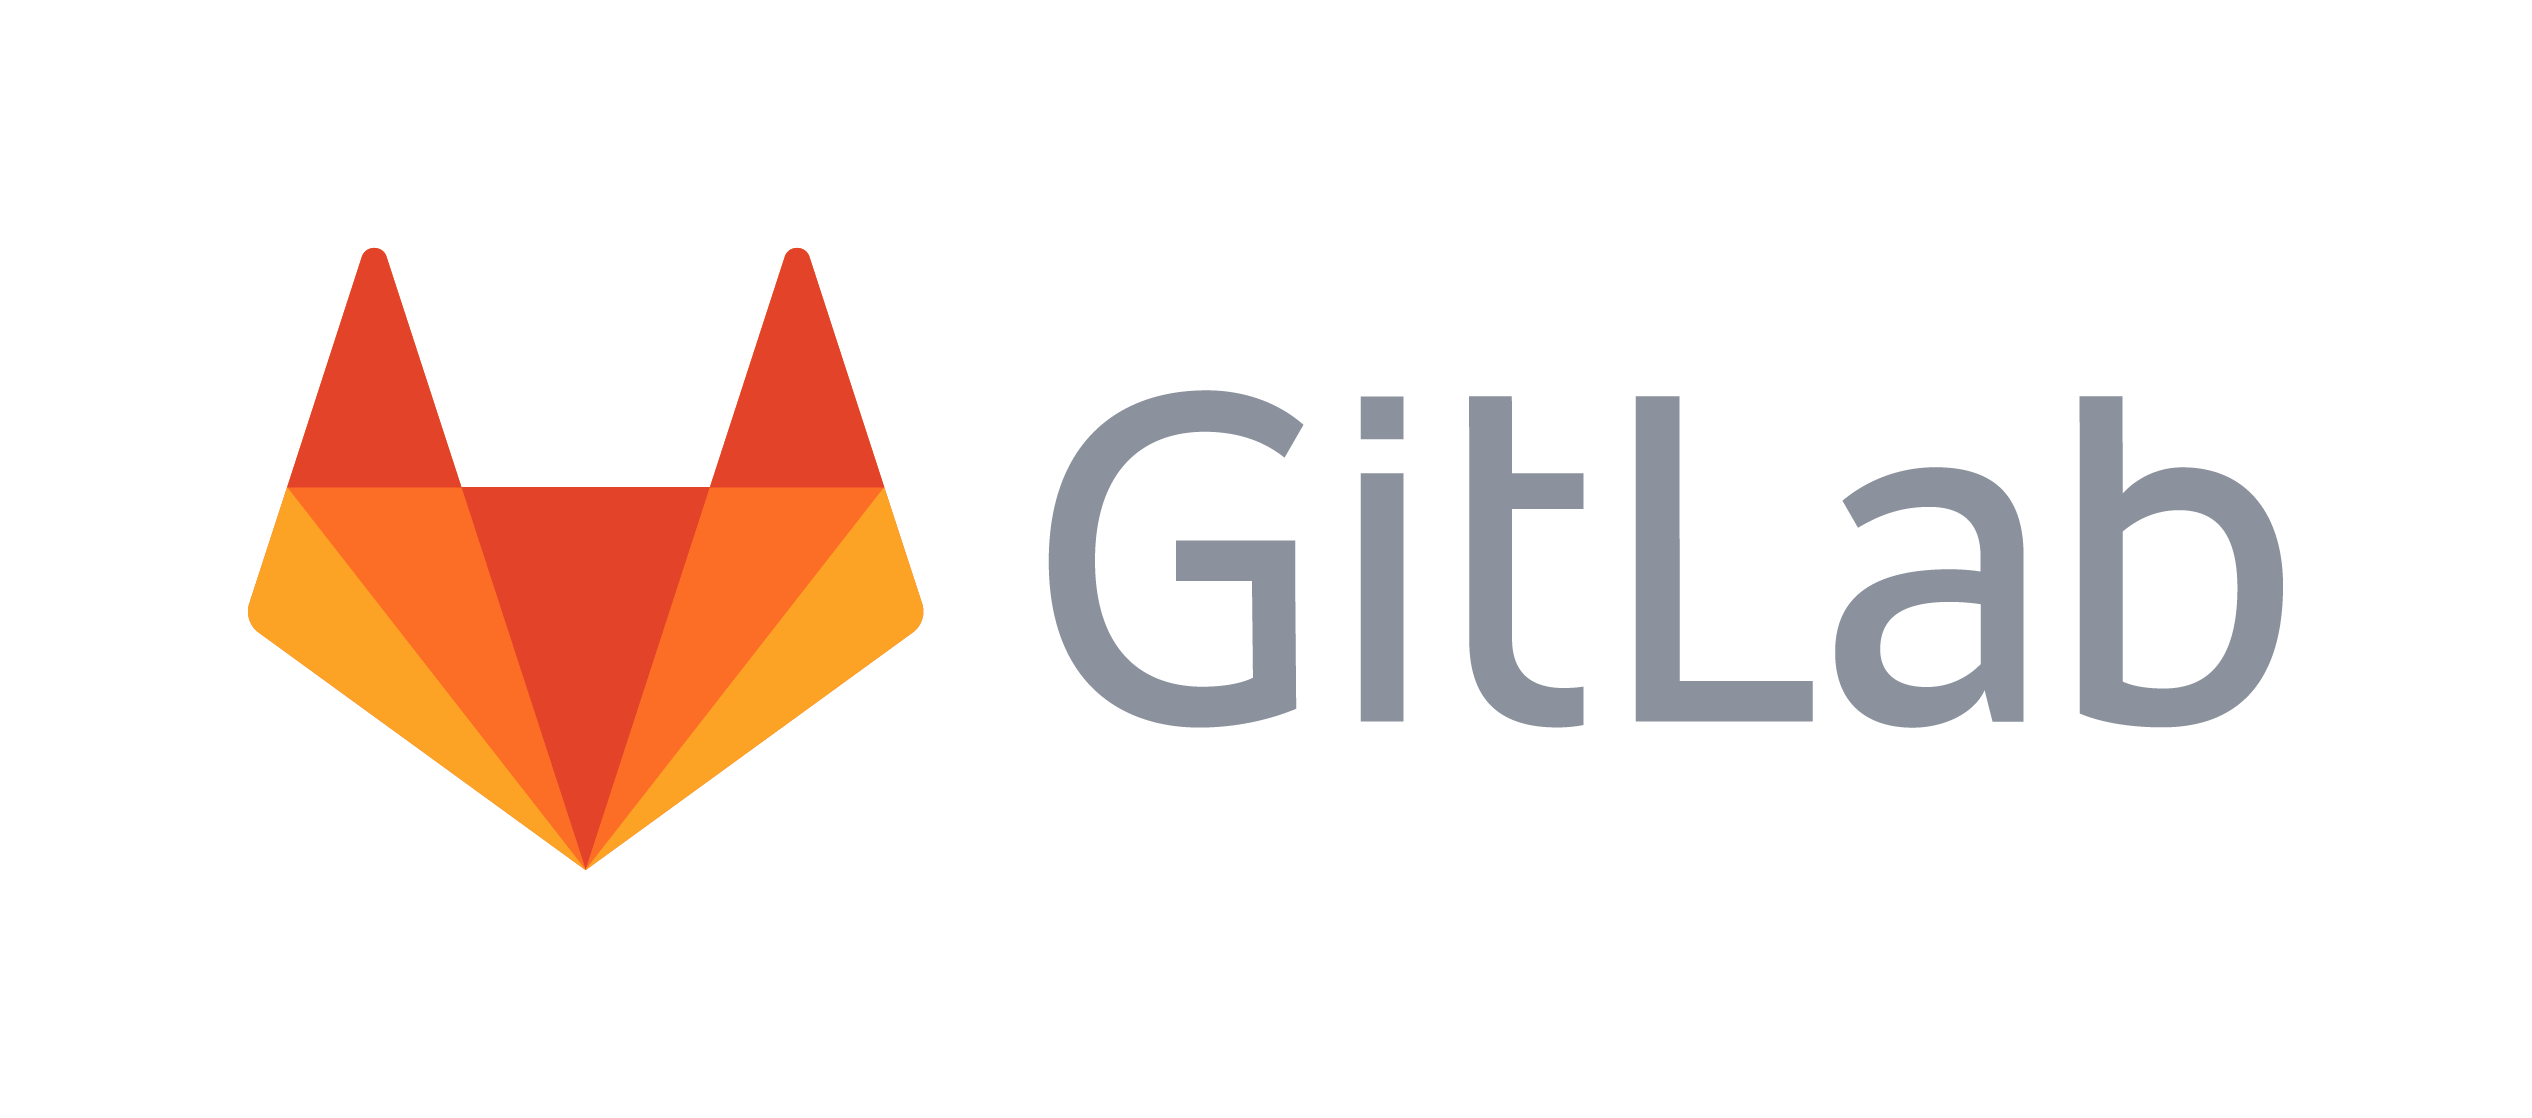 Top 20 Git Commands That Will Make You a Version Control. 